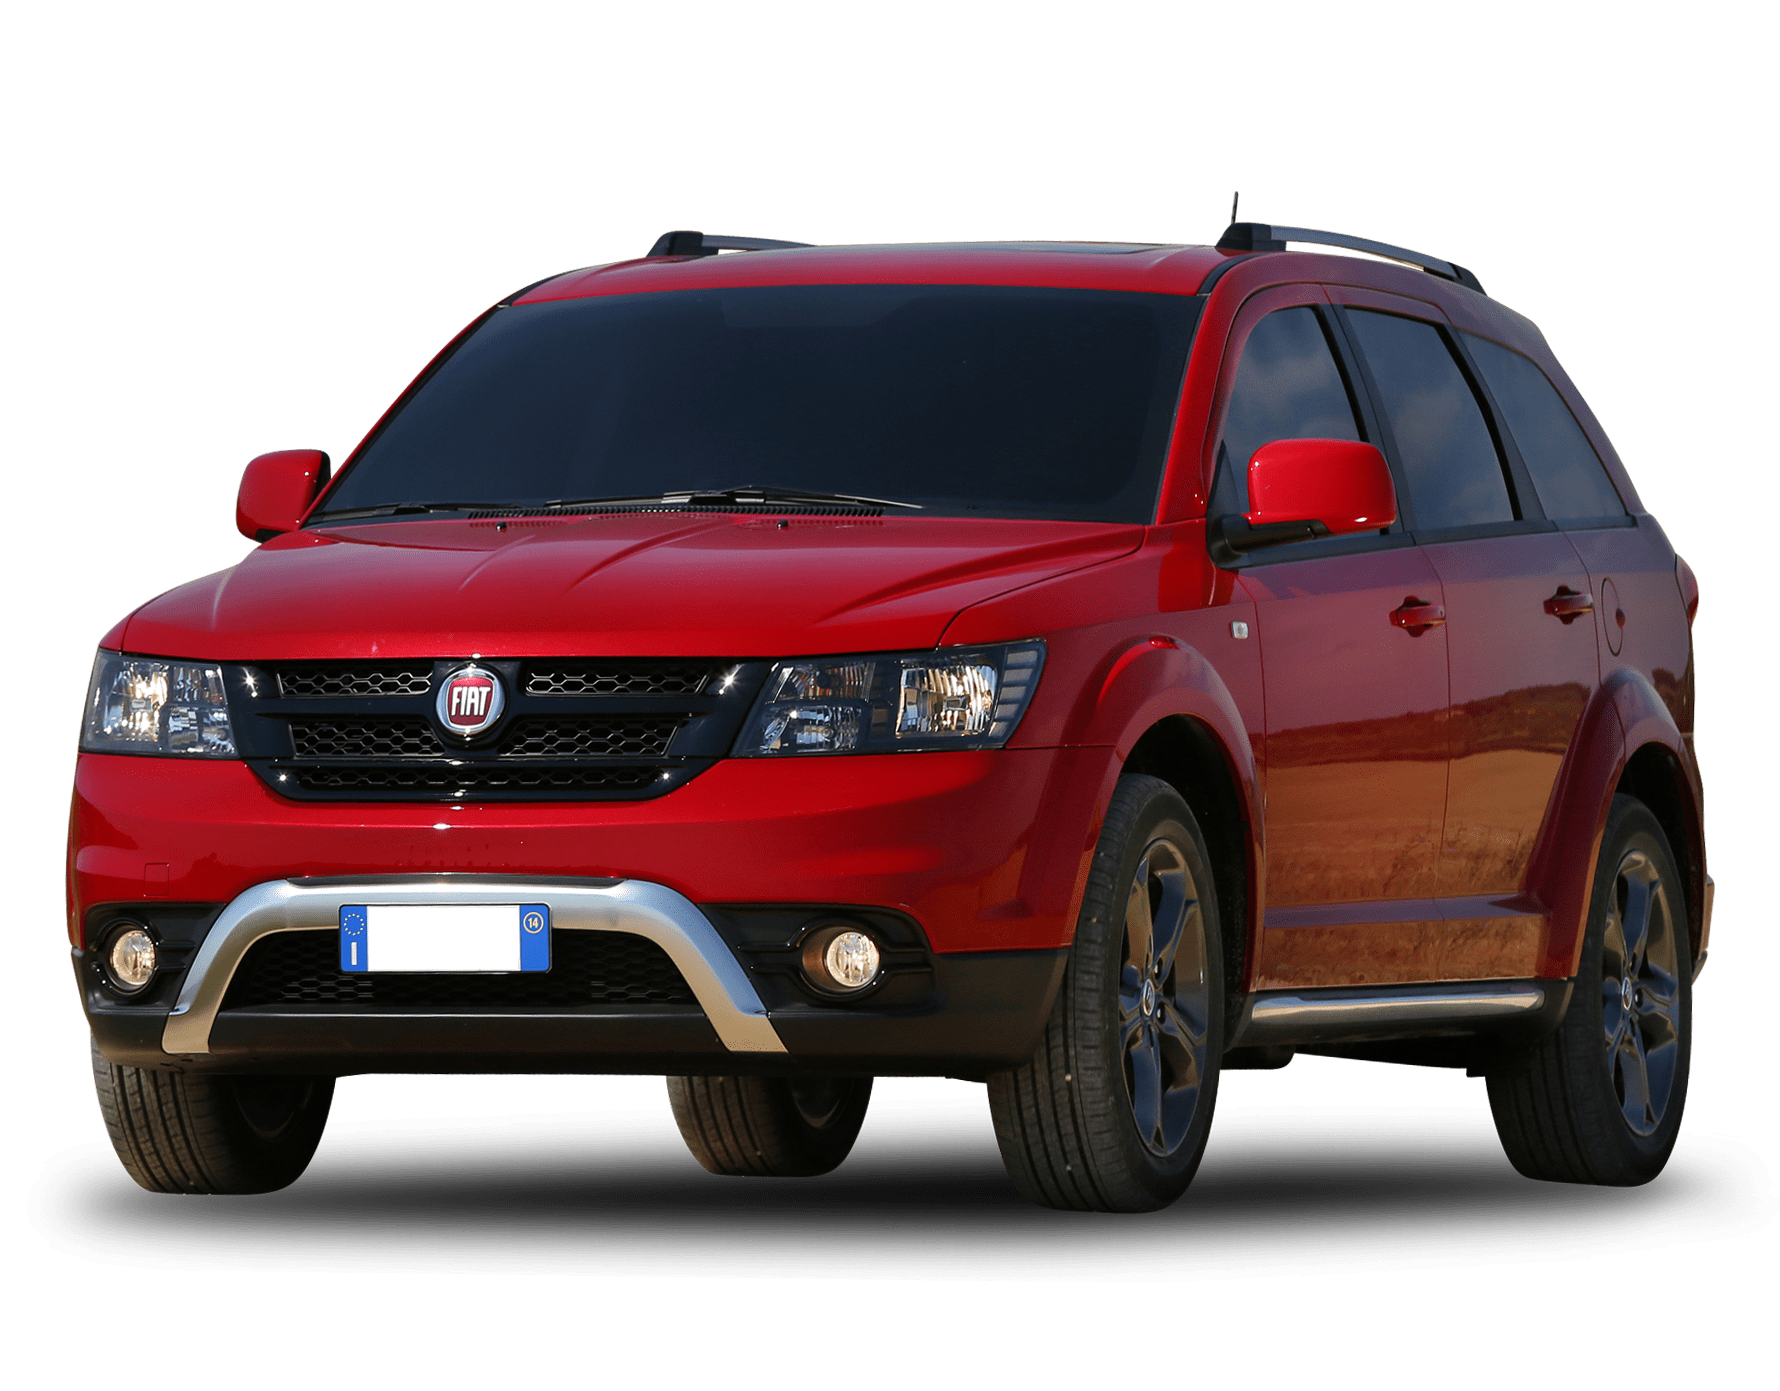 Fiat Freemont Review, For Sale, Interior, Specs & Models in Australia